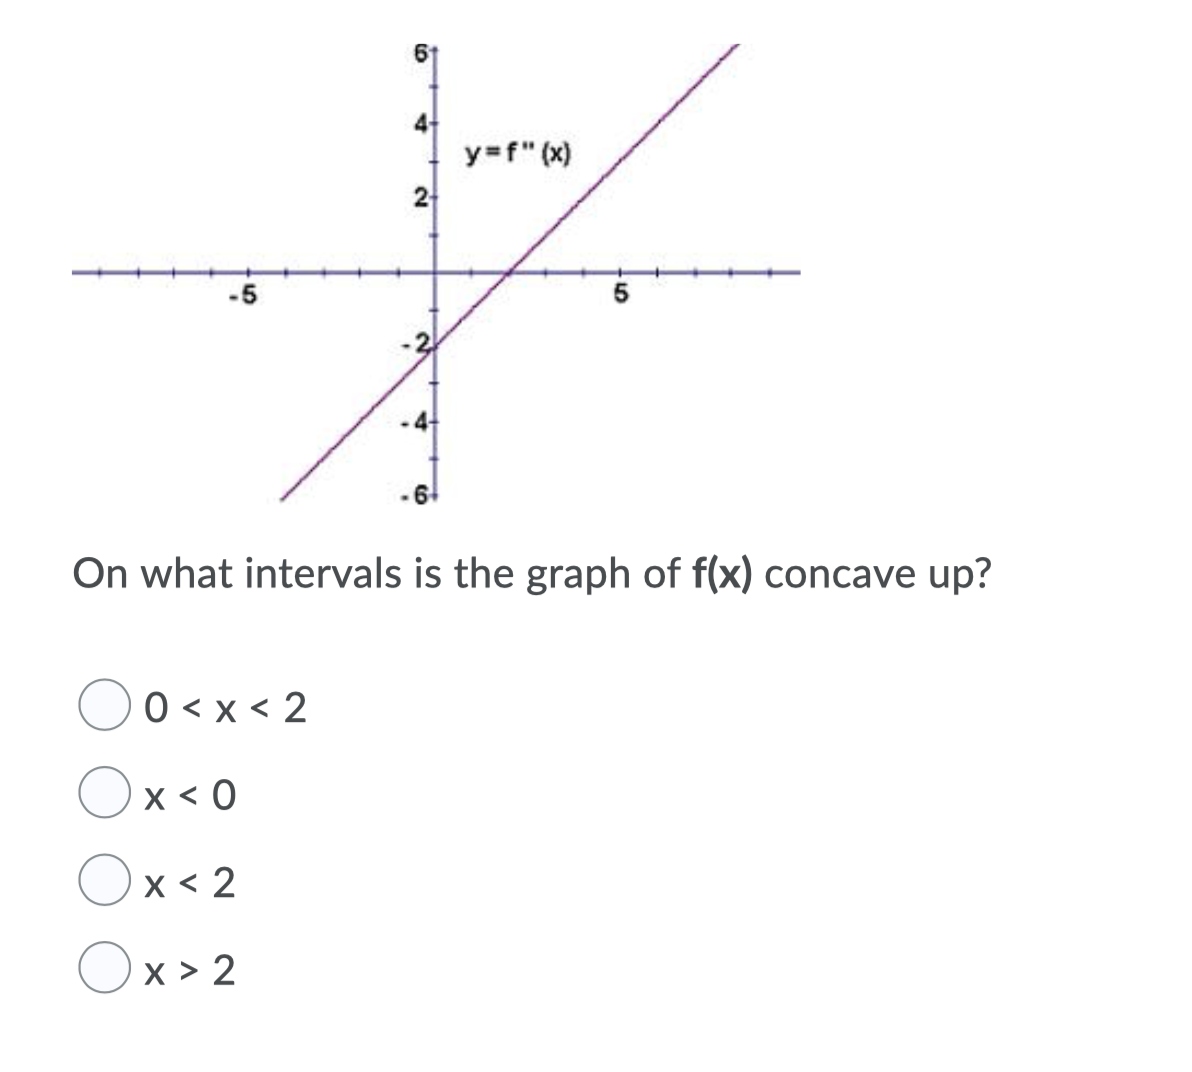 61
4
y=f" (x)
2
-5
4+
On what intervals is the graph of f(x) concave up?
0 < x < 2
Ox < 0
Ox < 2
Ox > 2
х>2
